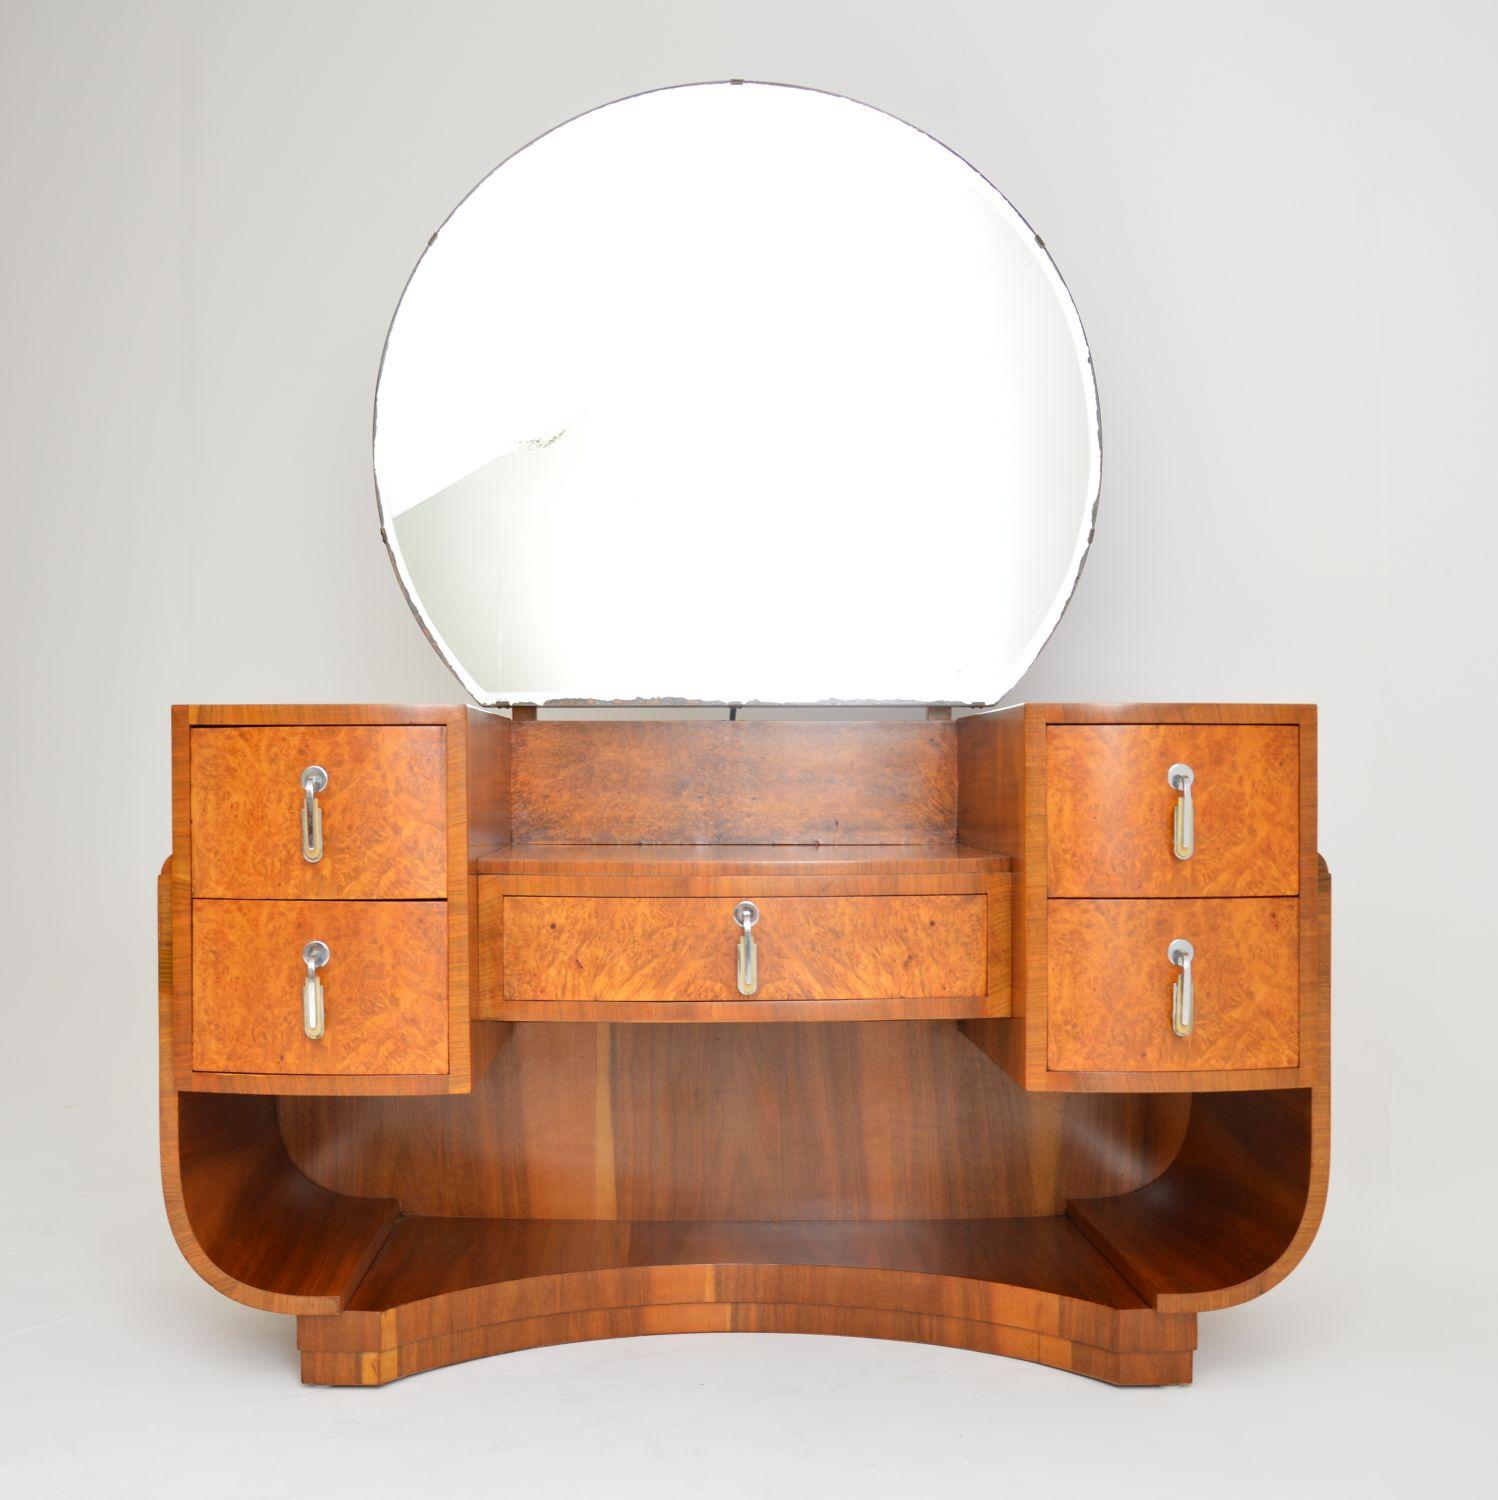 A beautiful and extremely well made original Art Deco period dressing table. This is made from burr walnut, it dates from the 1920s-1930s. The quality is excellent, and so is the condition. We have had this stripped and re-polished to a very high